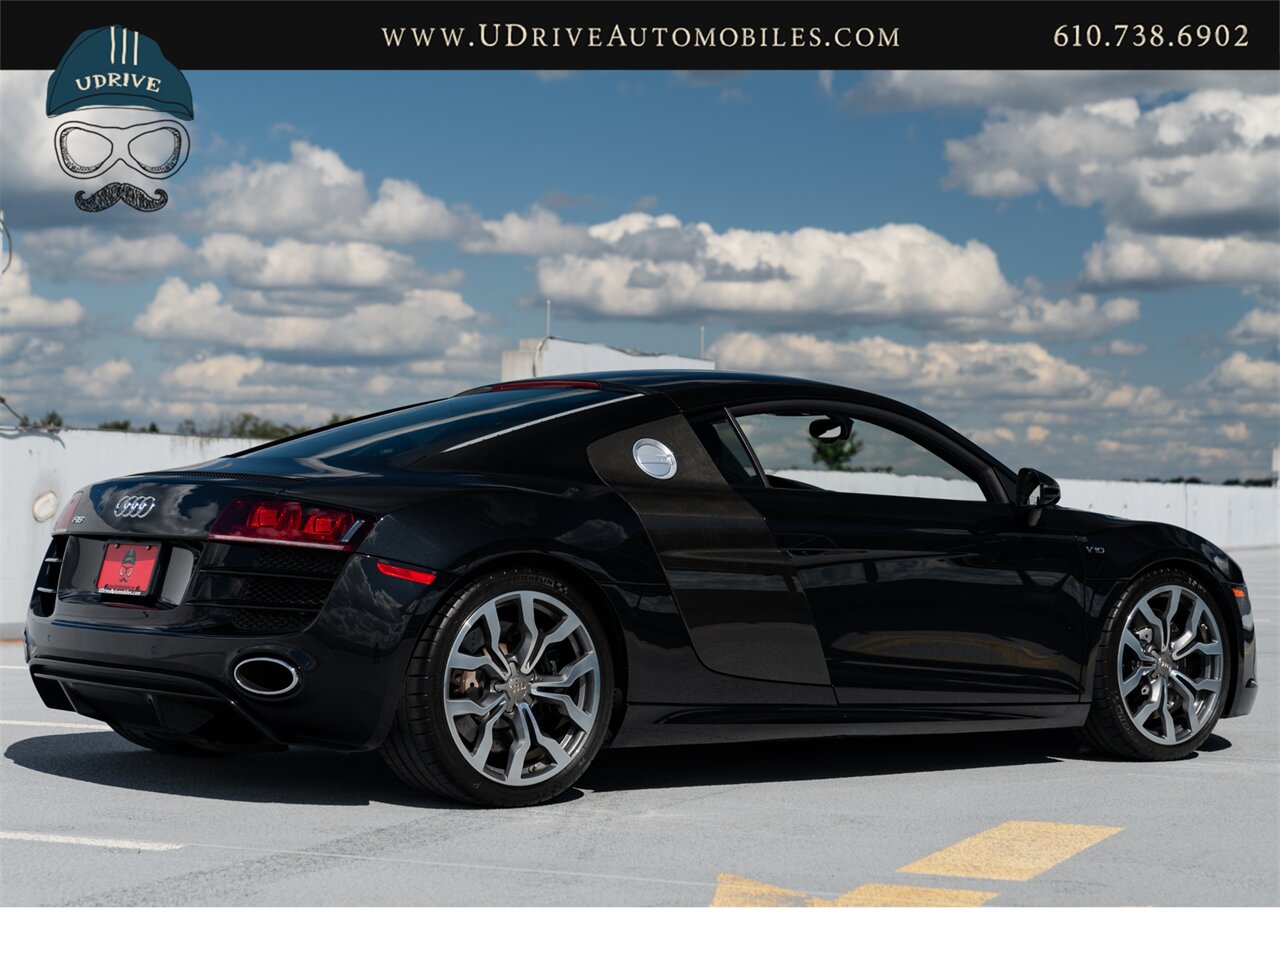 2011 Audi R8 5.2 Quattro  V10 6 Speed Manual - Photo 19 - West Chester, PA 19382